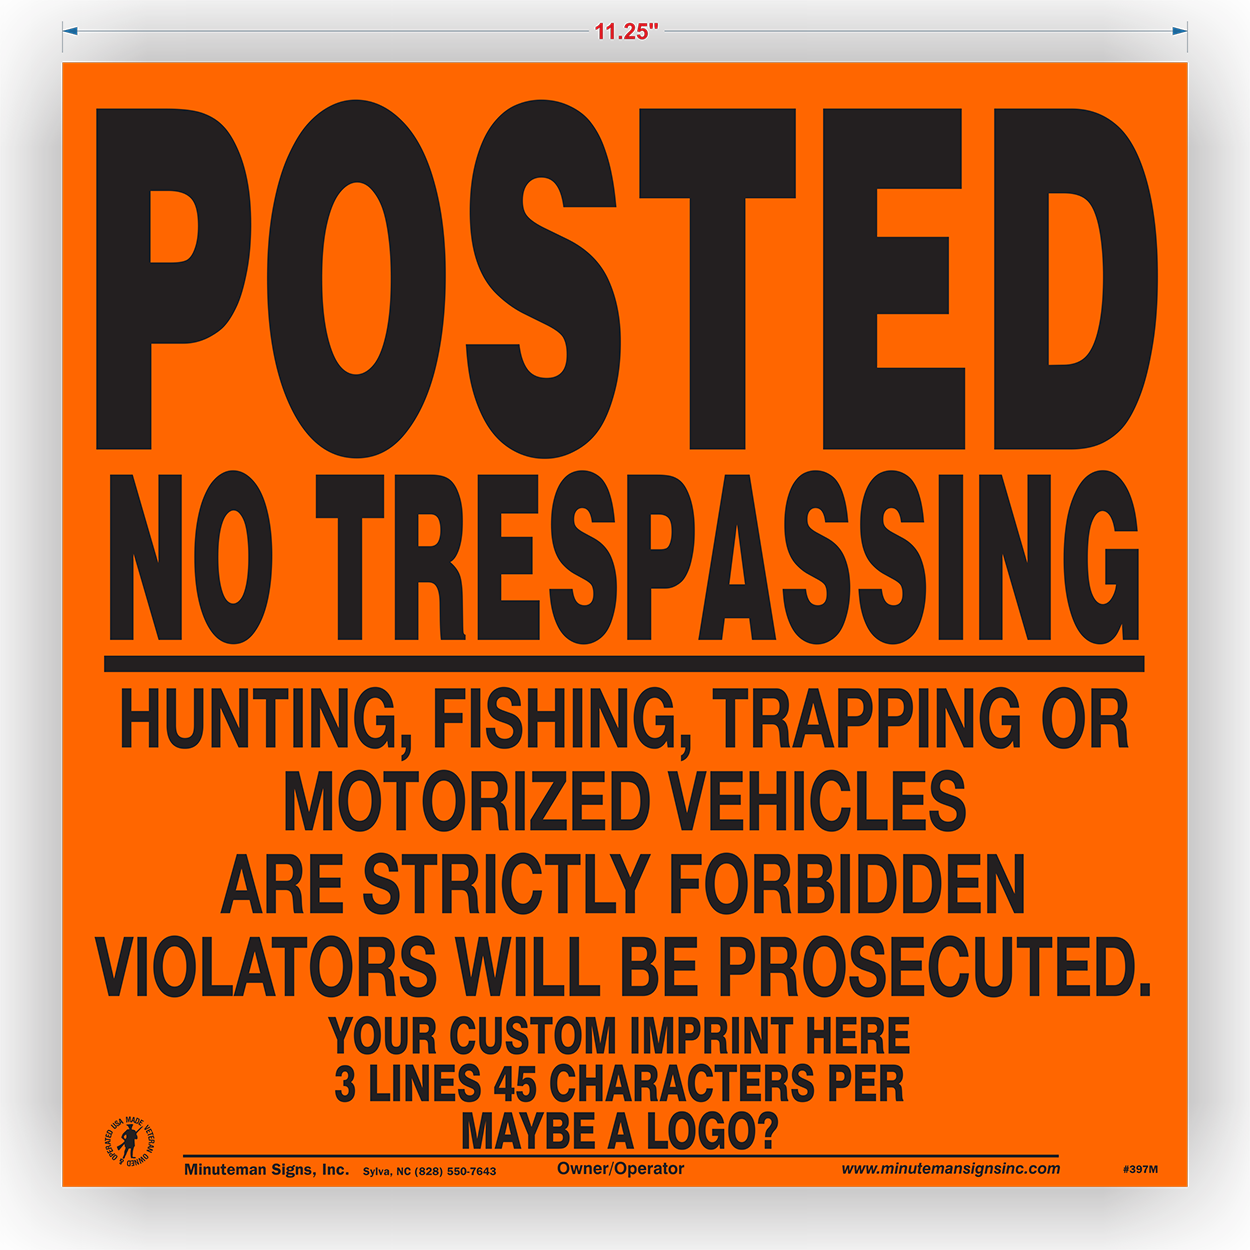 https://www.notrespassingsigns.us/wp-content/uploads/posted-no-trespassing-hunting-fishing-trespassing-motorized-vehicles-1.png